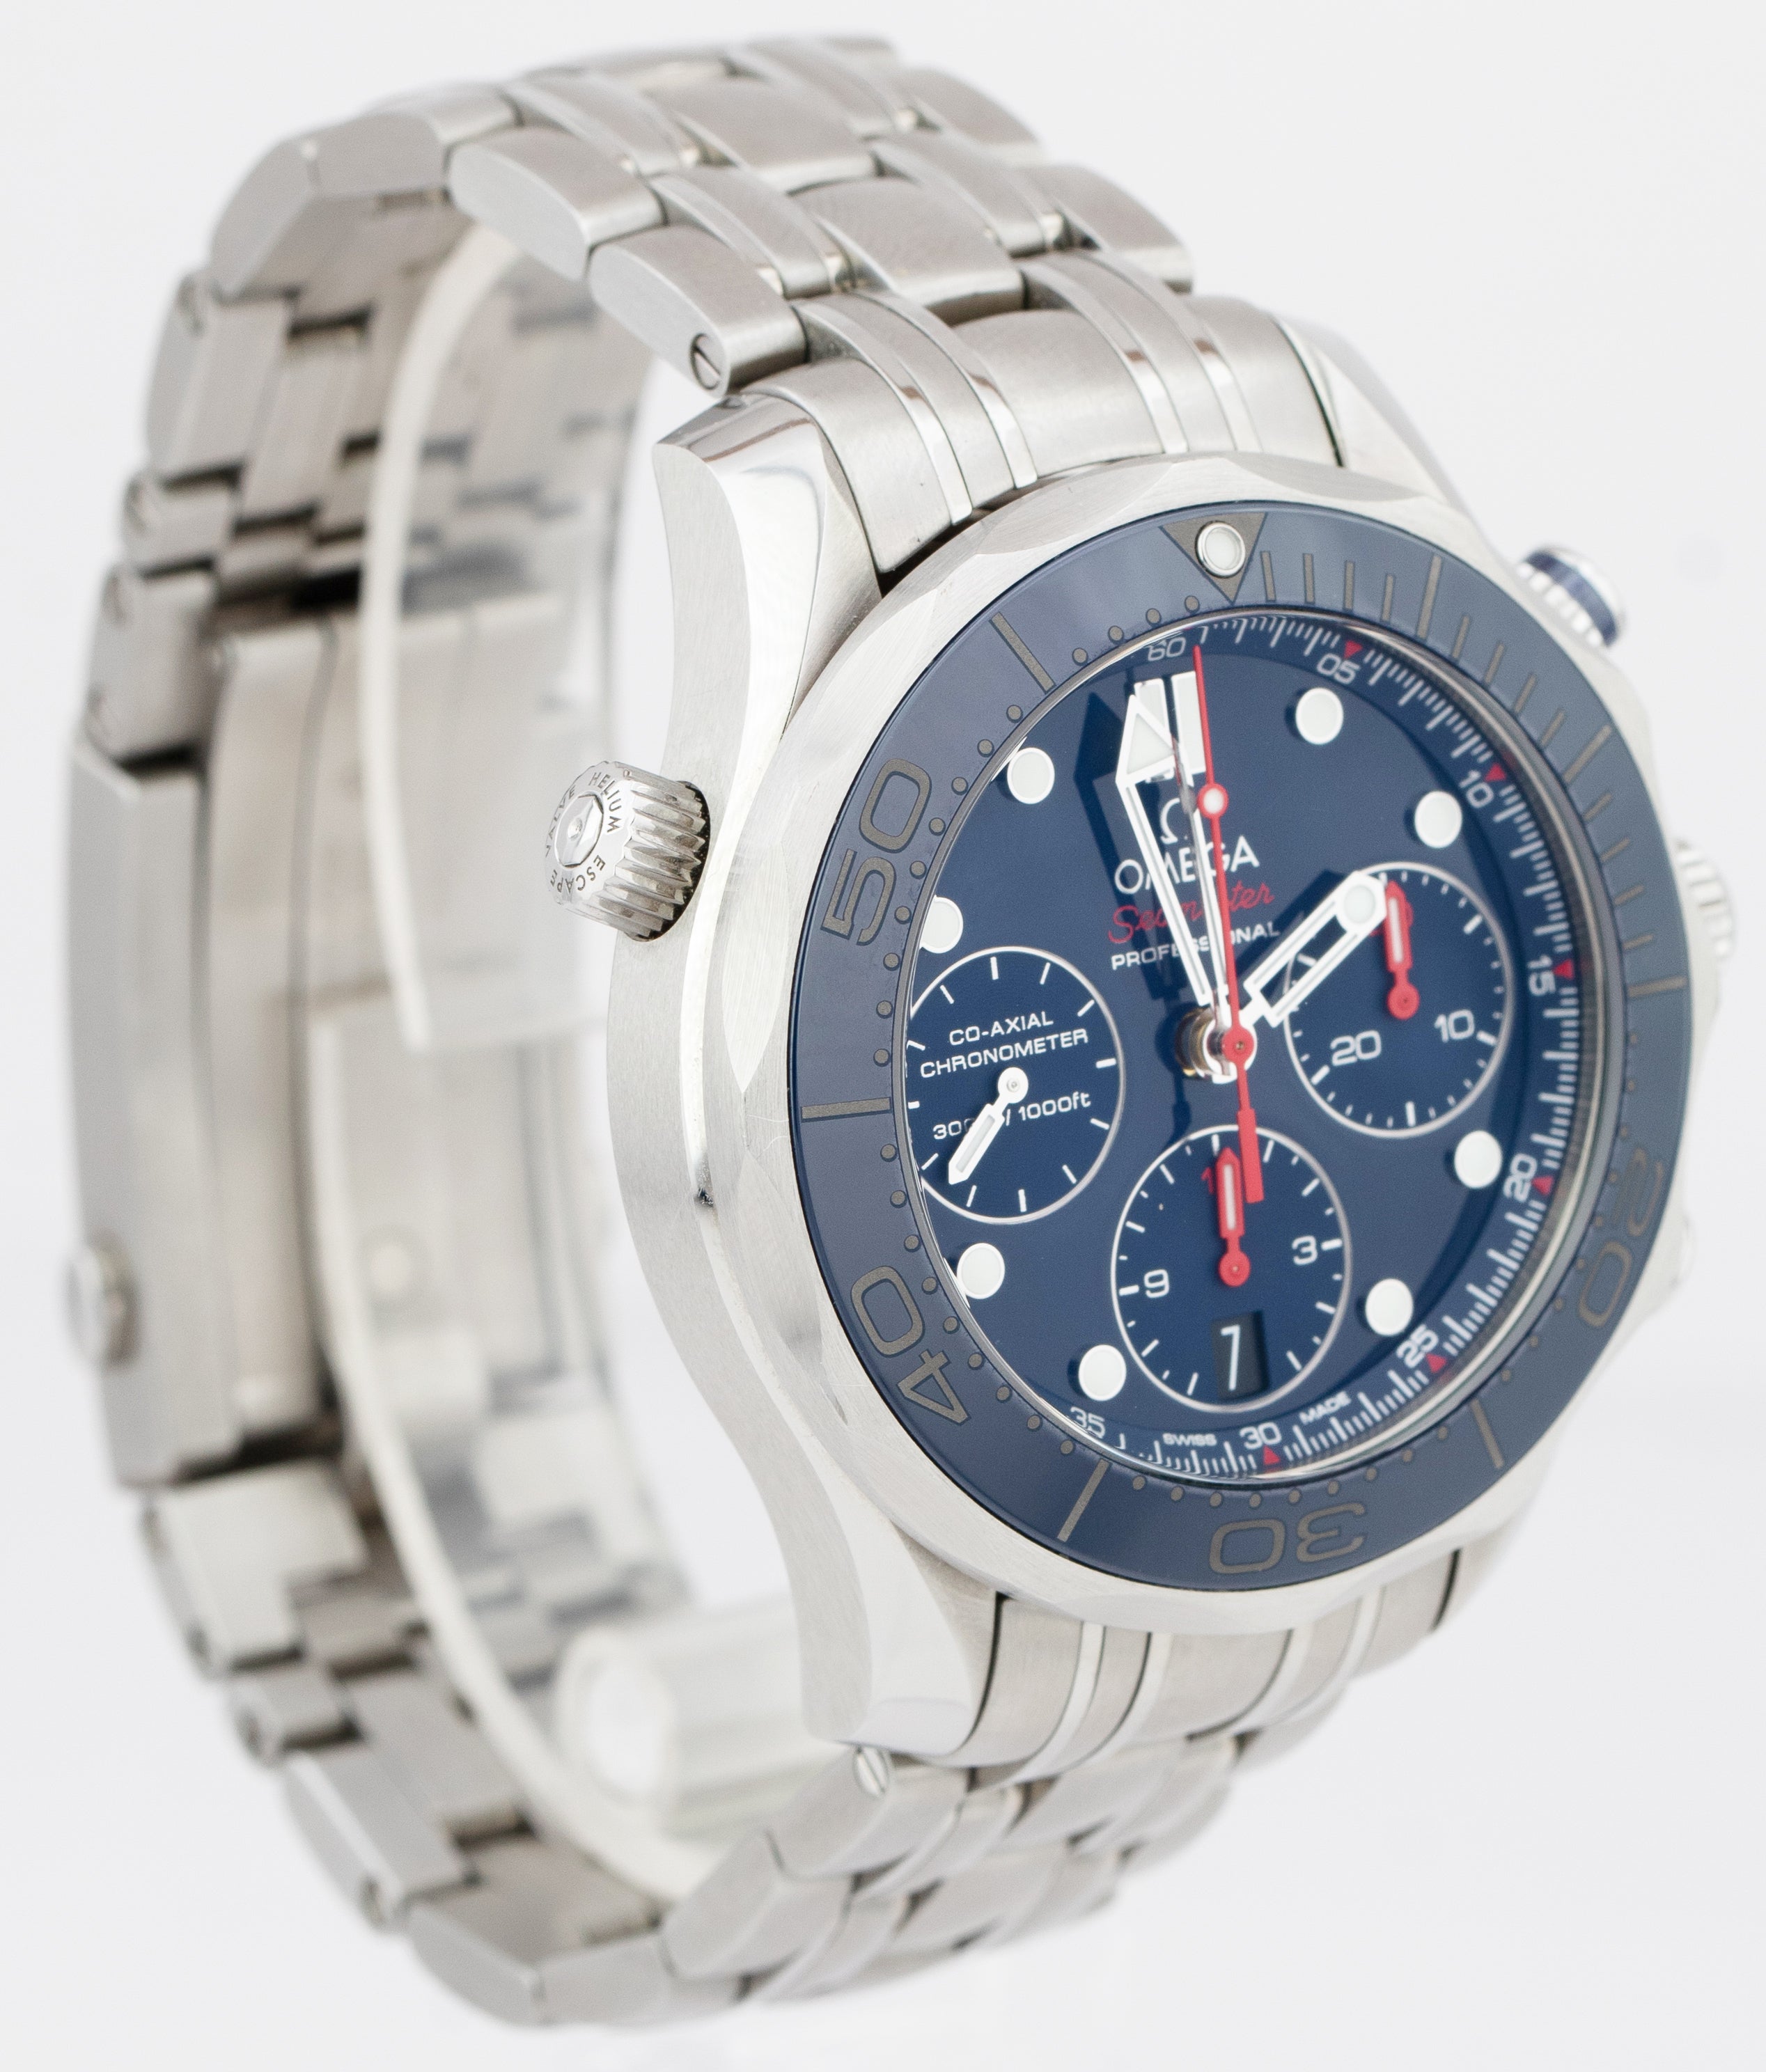 Omega Seamaster Diver 300 Chronograph 42mm Blue Steel 212.30.42.50.03.001 Watch